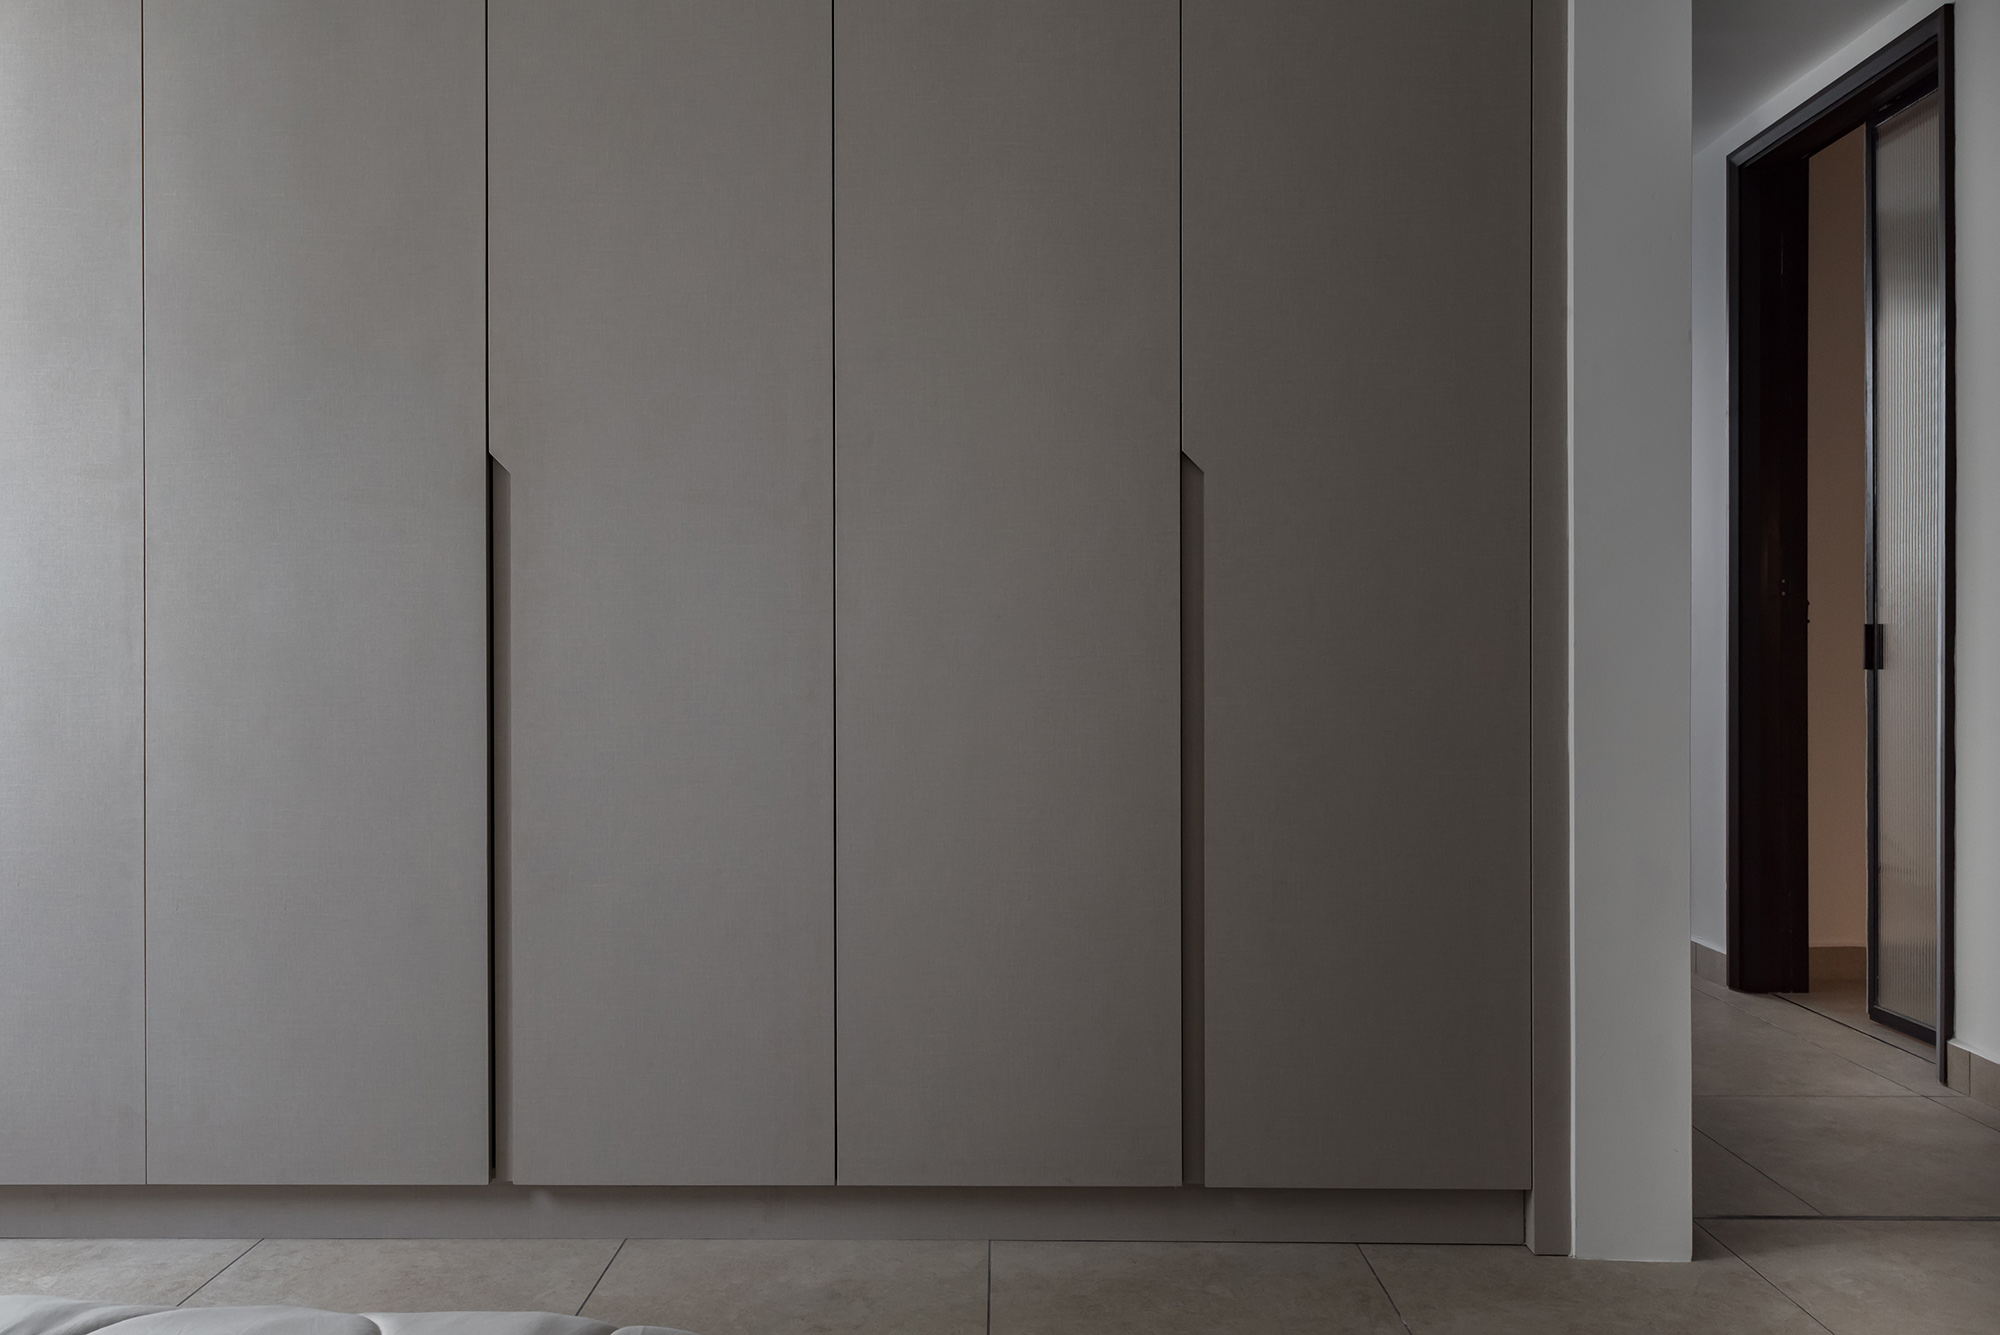 Image of Tamarind Malasia 4 in A seaside flat with a relaxed atmosphere, which enhances the brightness thanks to the off-white tone of Dekton Nayla - Cosentino